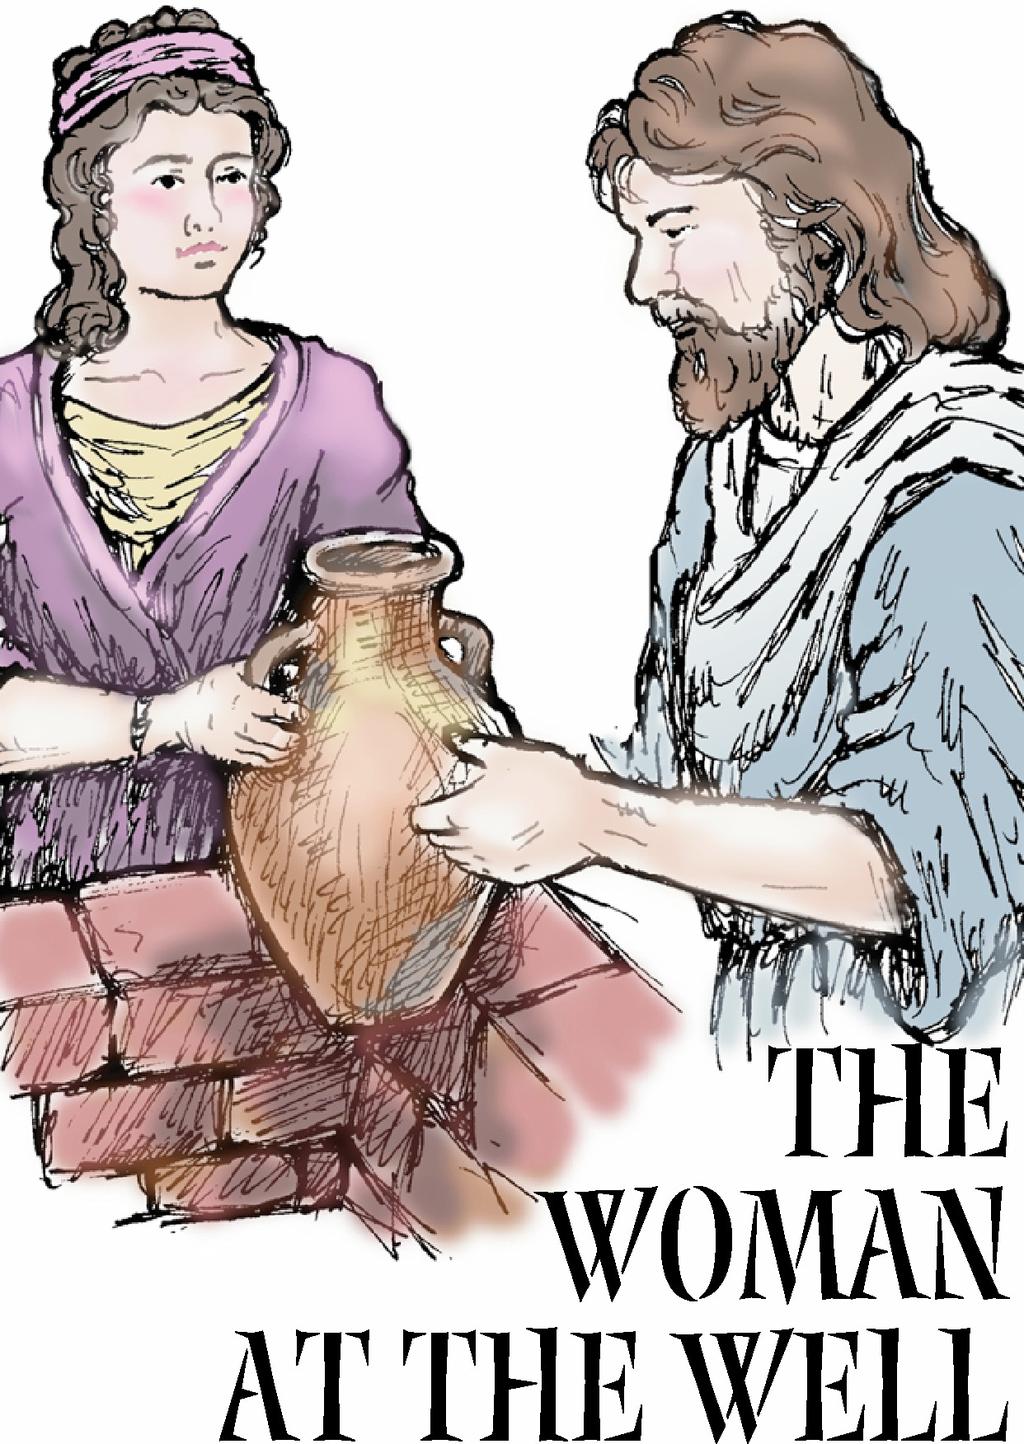 The Woman at the Well: Cooking Workshop A lesson written by Carol Hulbert from: First United Methodist Church, 120 S.